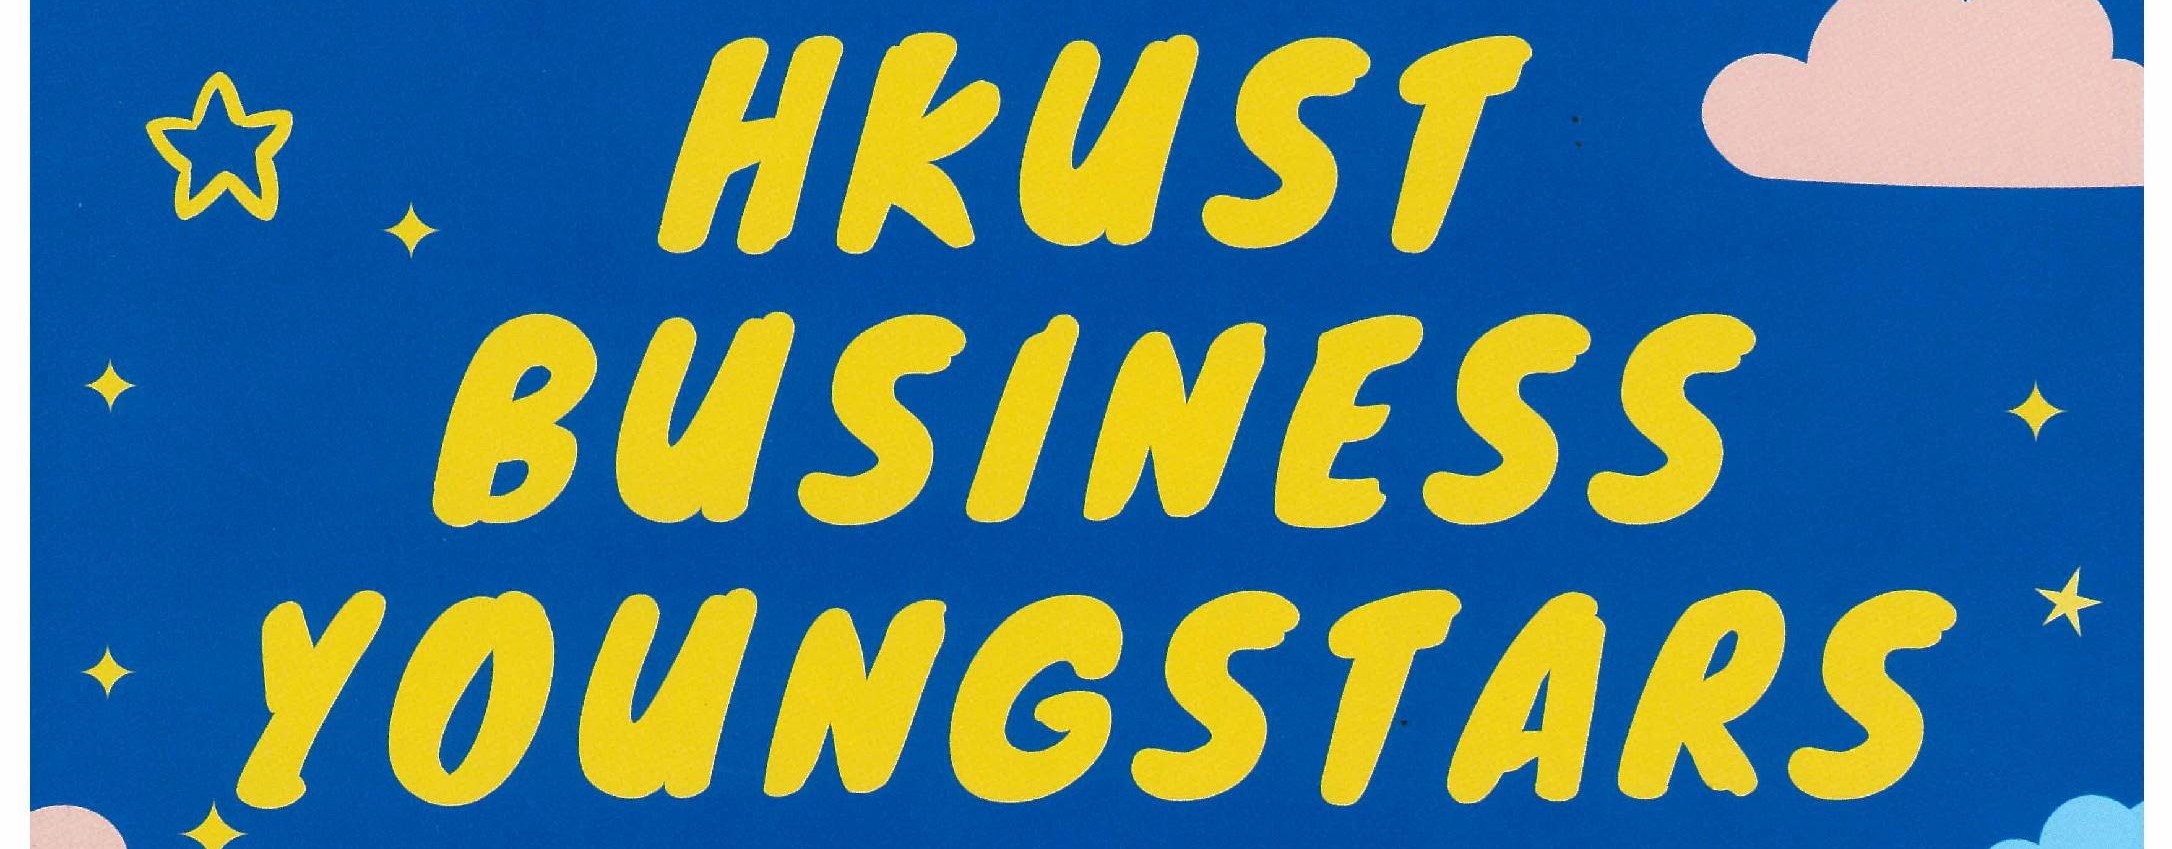 HKUST Virtual Business YoungStars